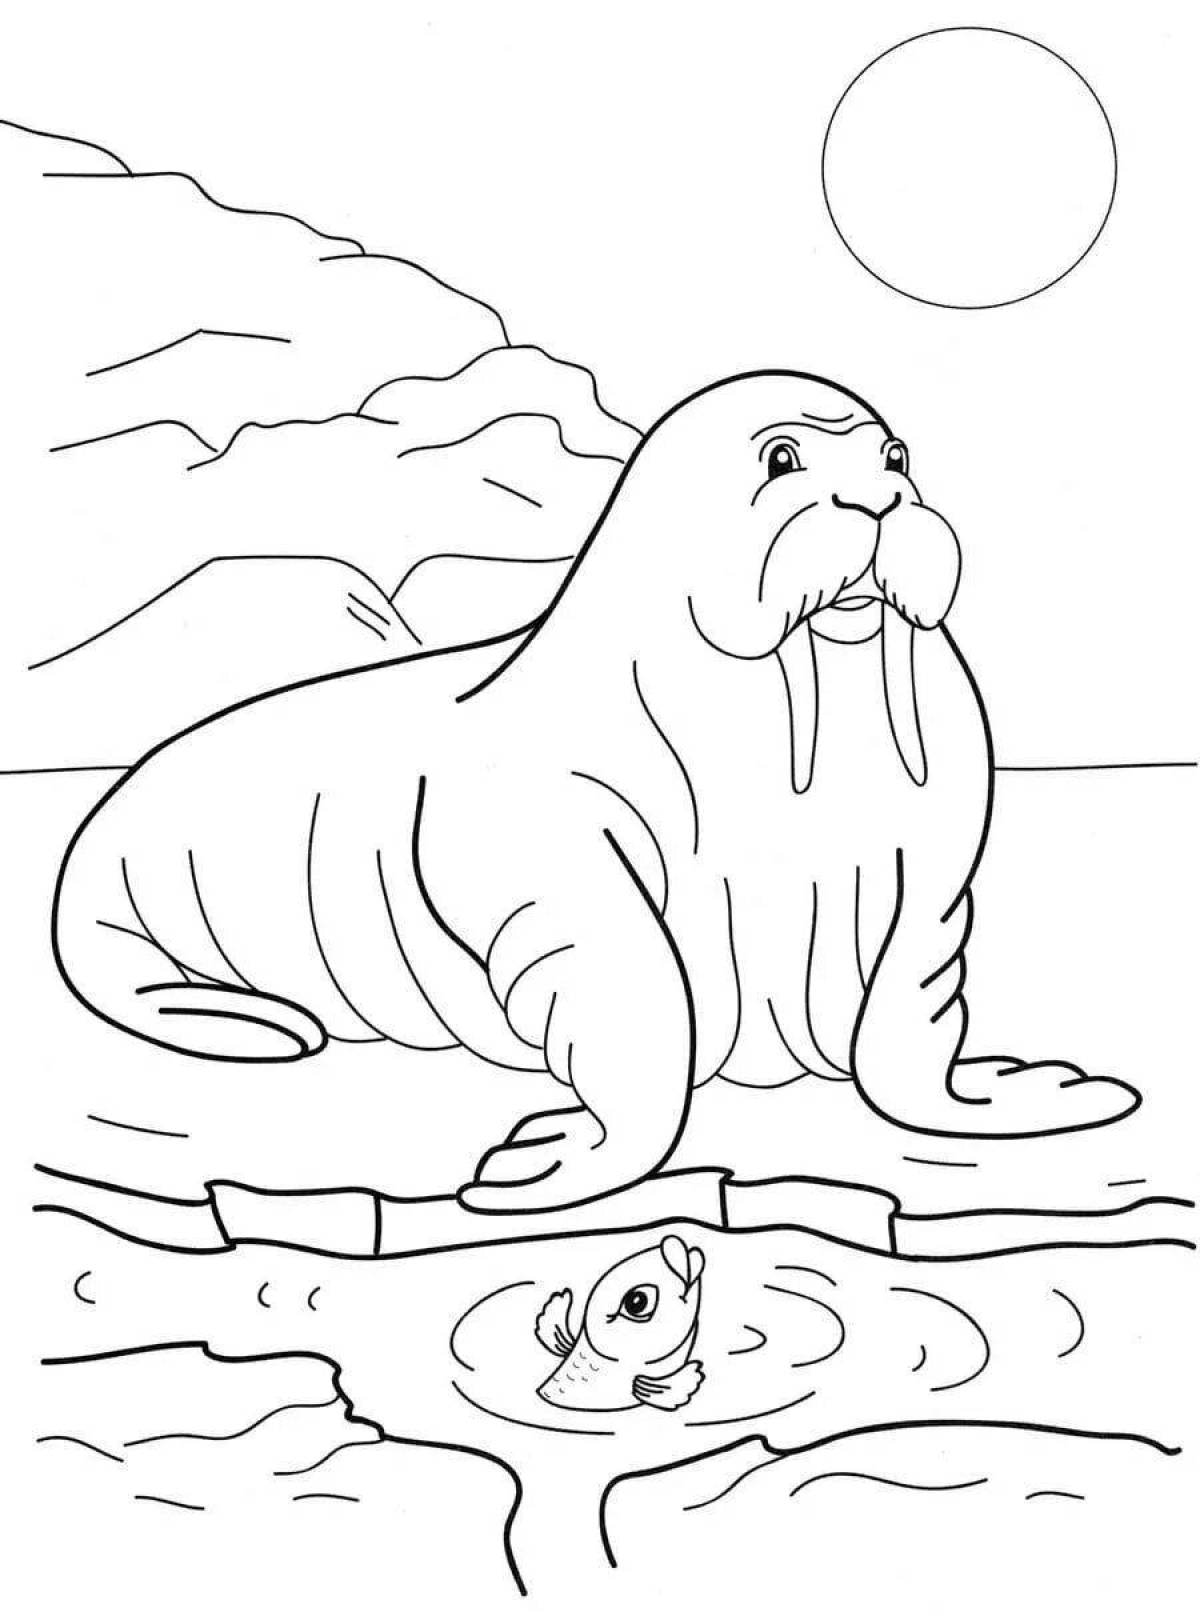 Coloring page cute animals of the far north